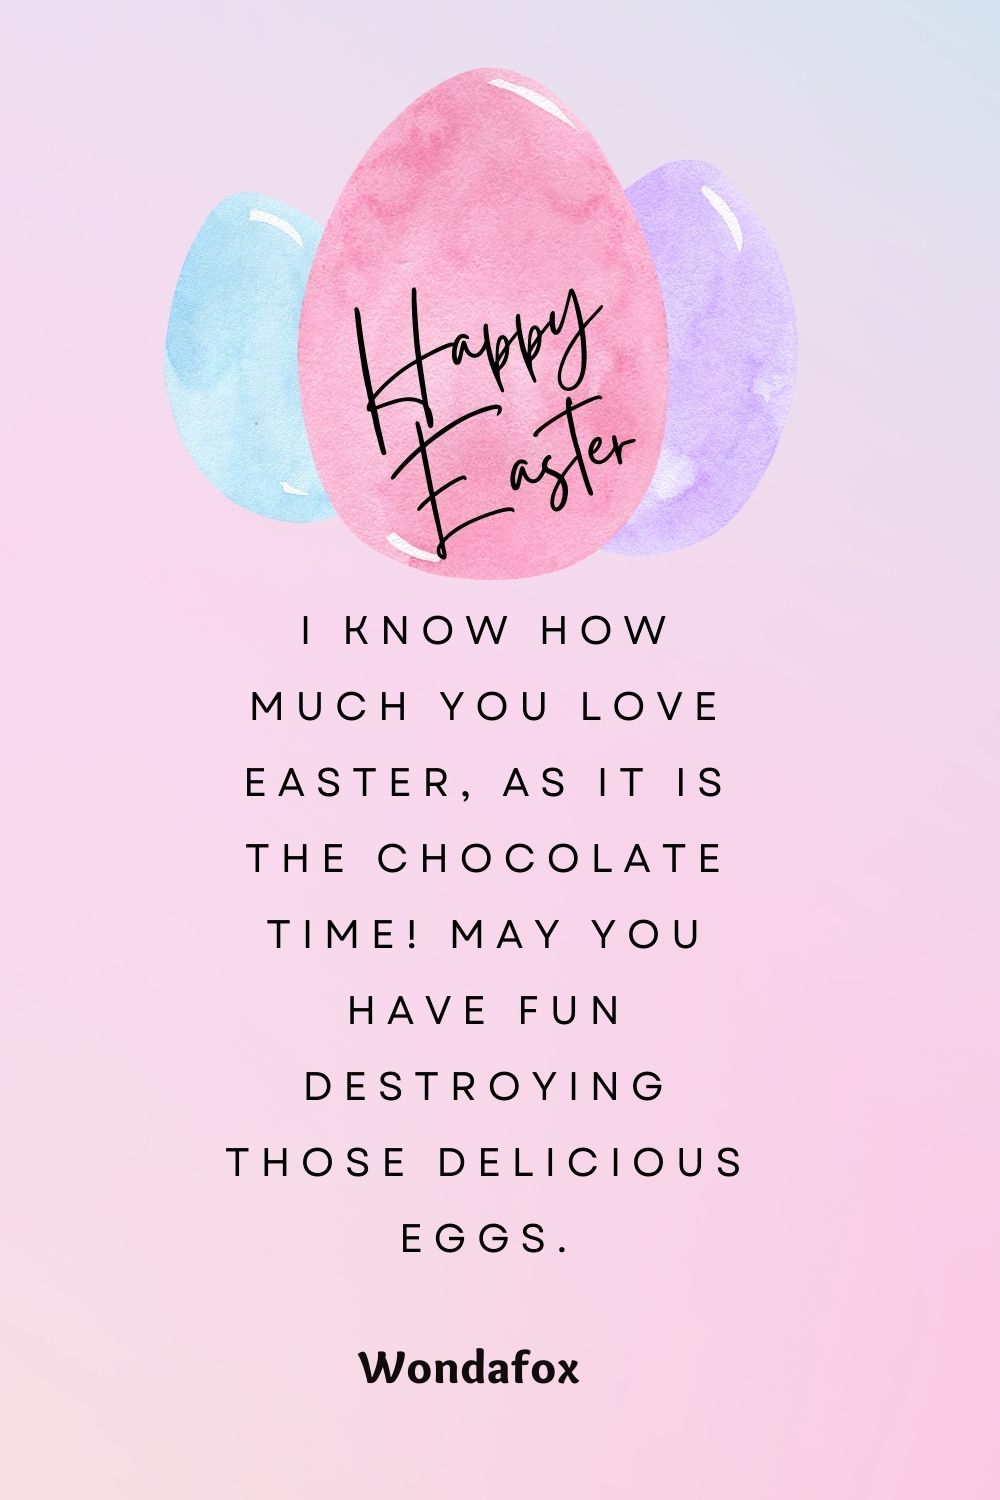 I know how much you love Easter, as it is the chocolate time! May you have fun destroying those delicious eggs.